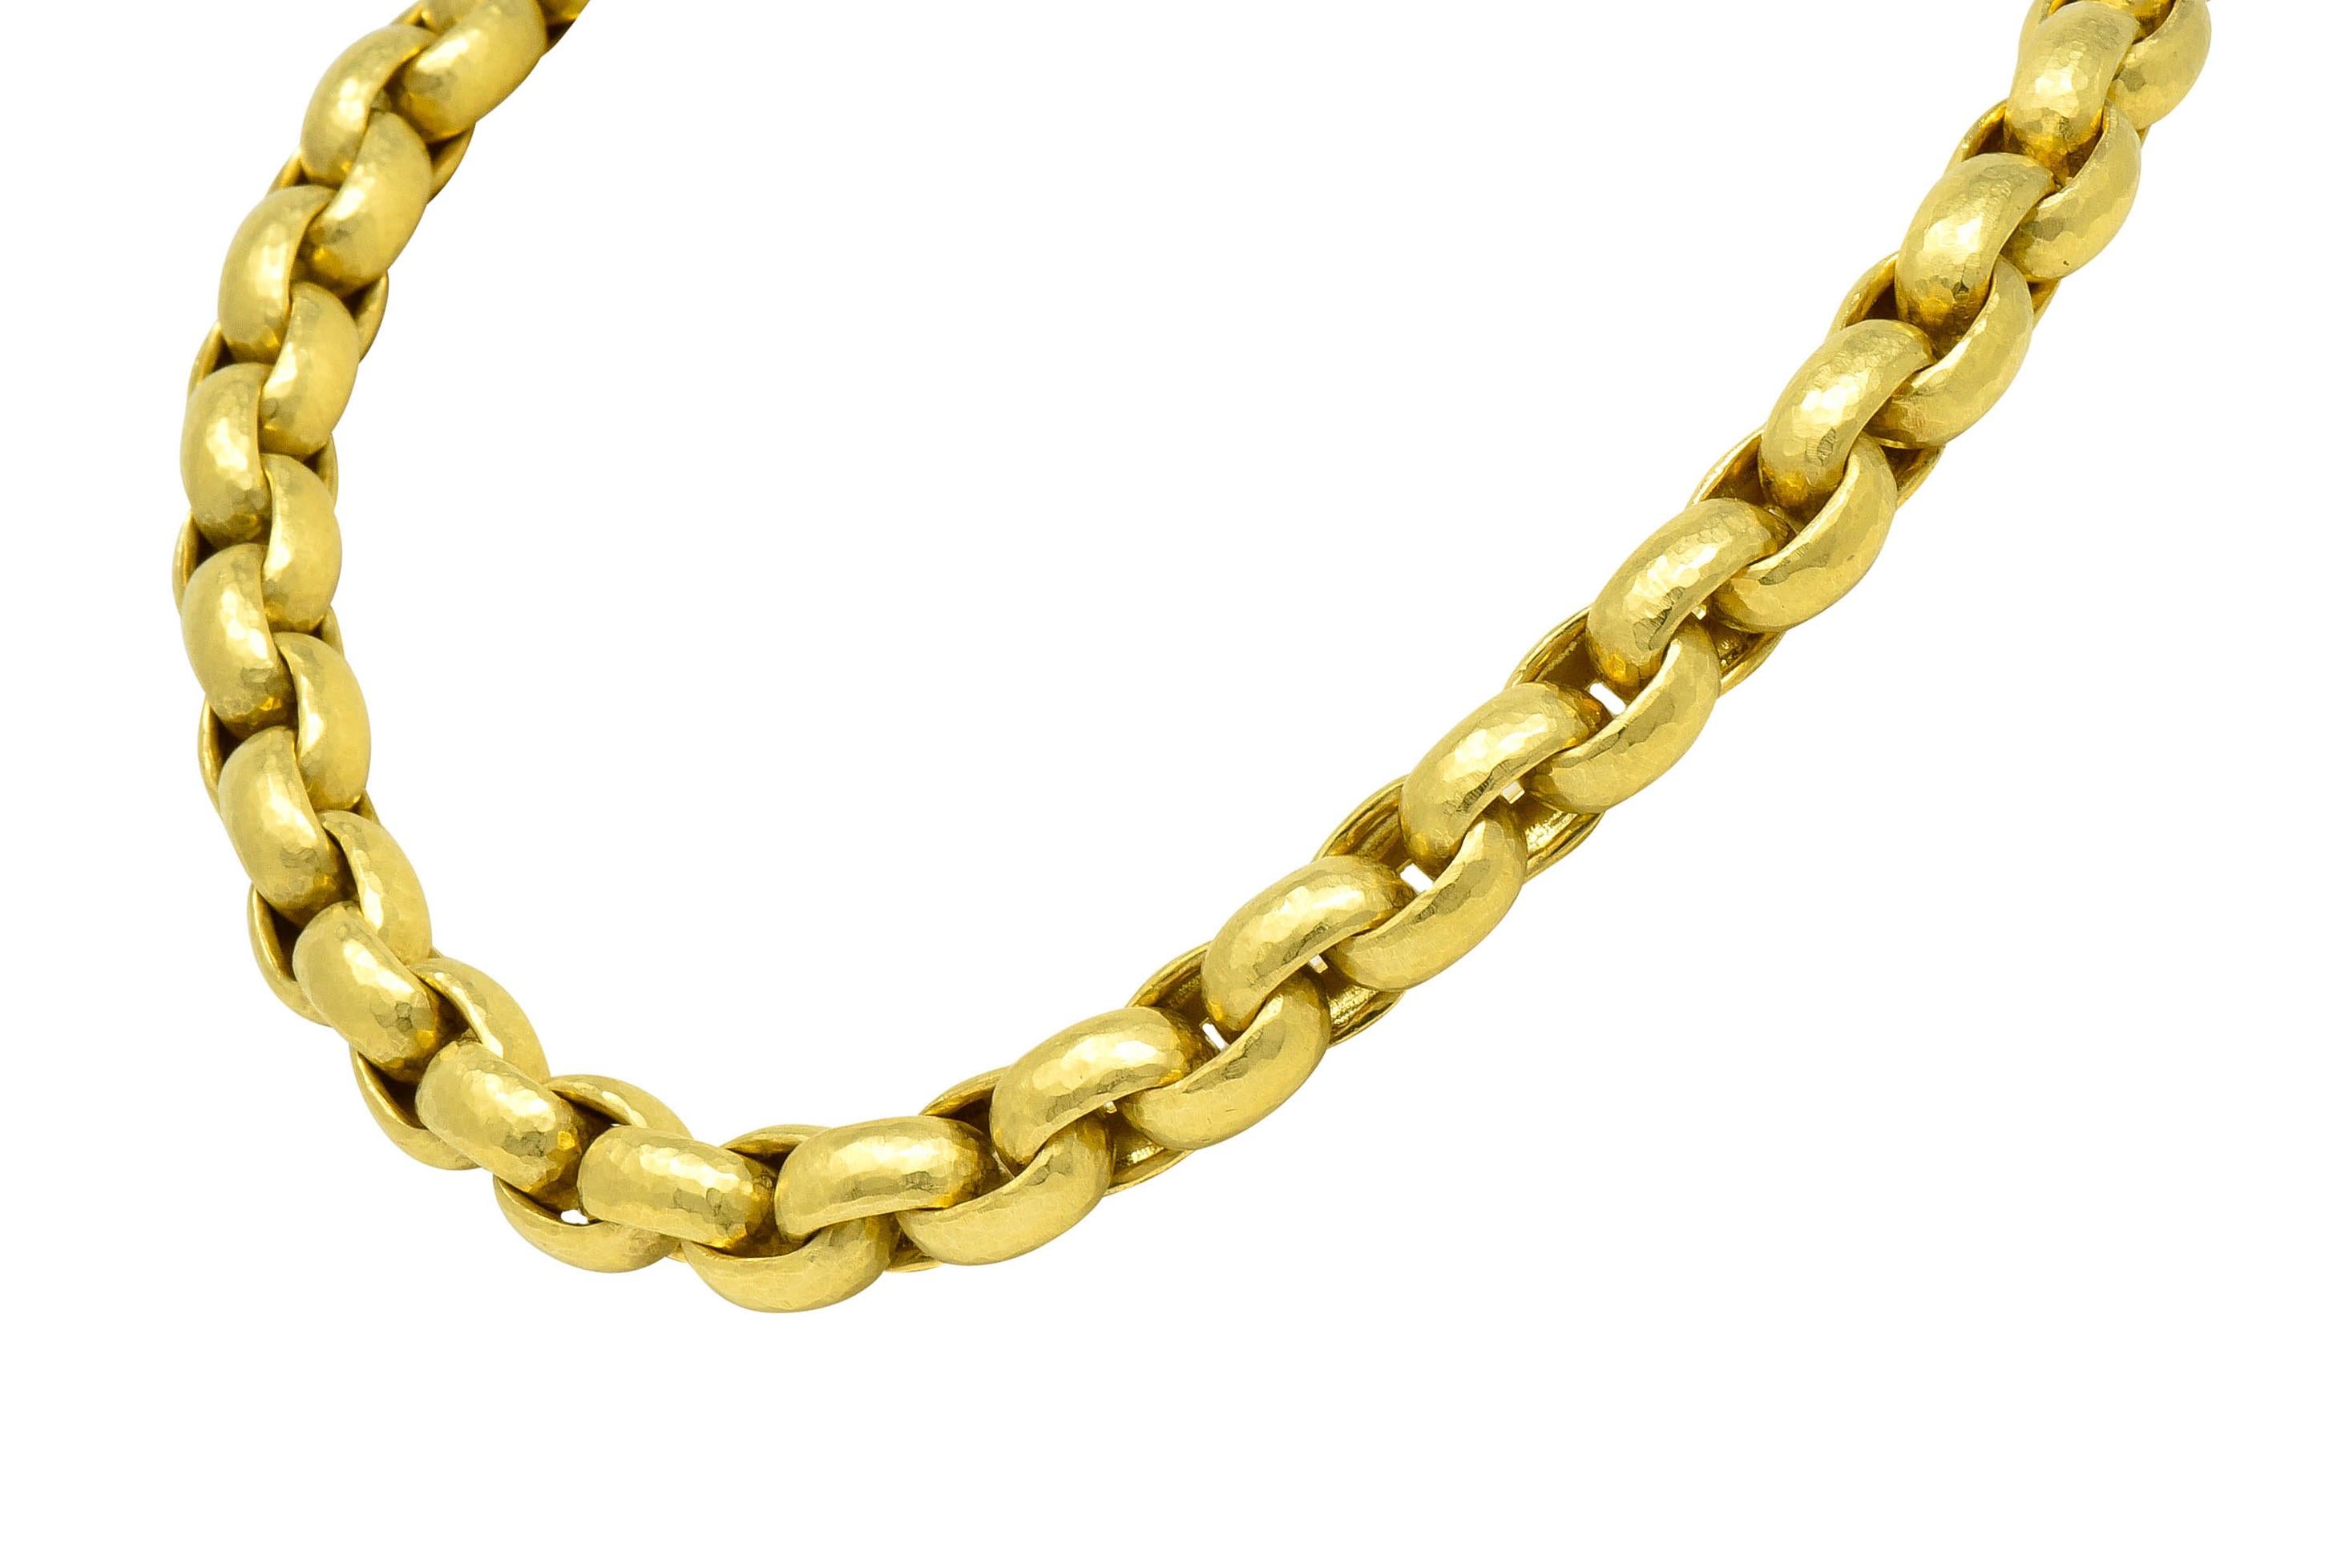 Modernist Paloma Picasso Tiffany & Co. 18 Karat Yellow Gold Hammered Link Necklace